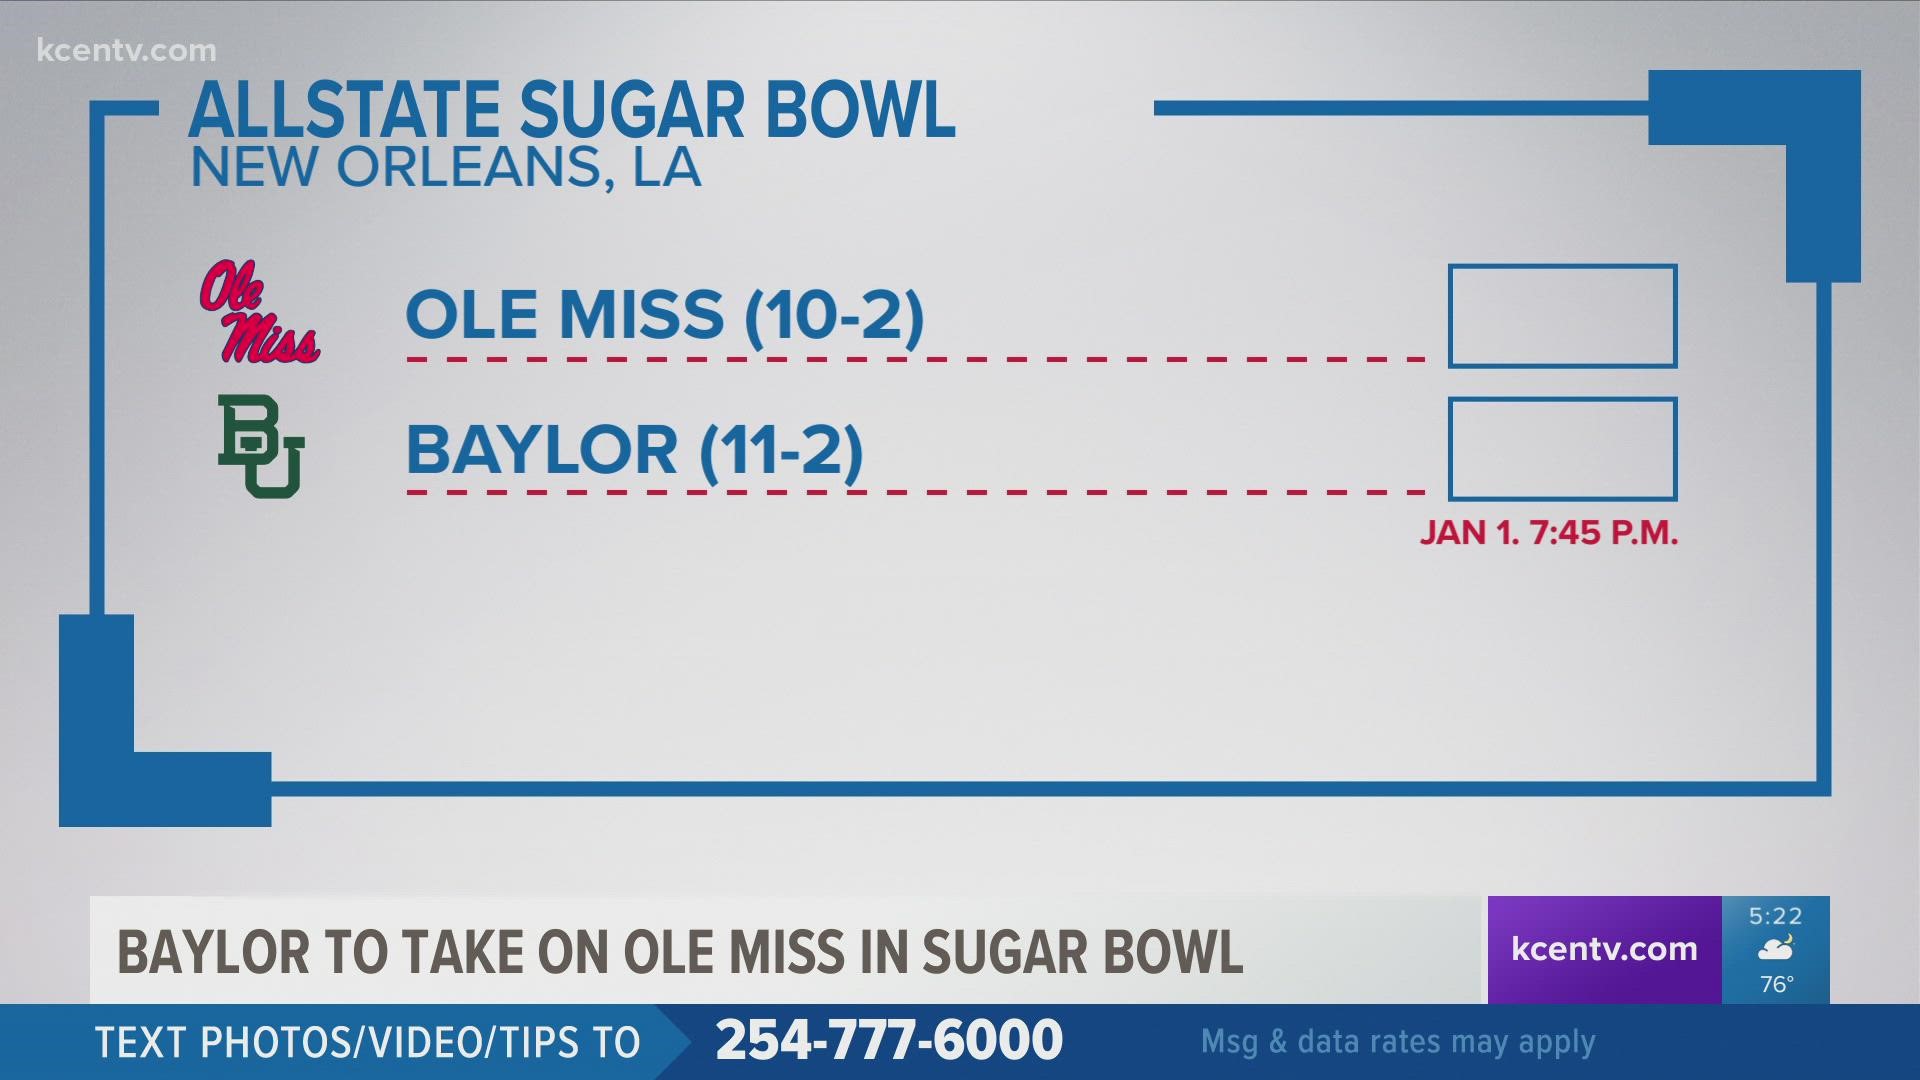 The Bears will play the Rebels in its 3rd Sugar Bowl appearance